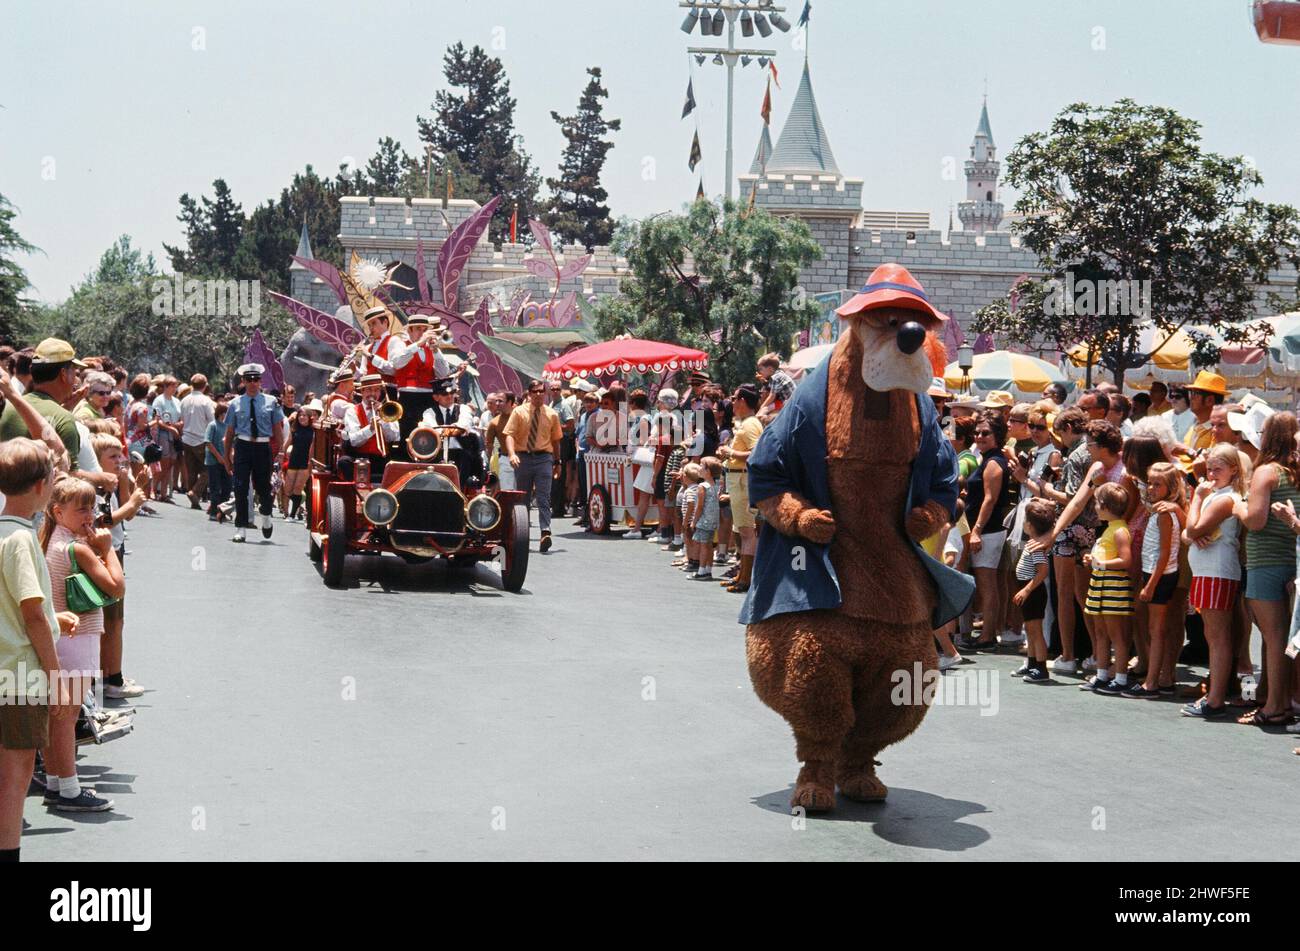 Scenes at the Disneyland theme park in Anaheim, California, United States.  The band playing accompanied by Disney characters during the Main Street parade. June 1970. Stock Photo